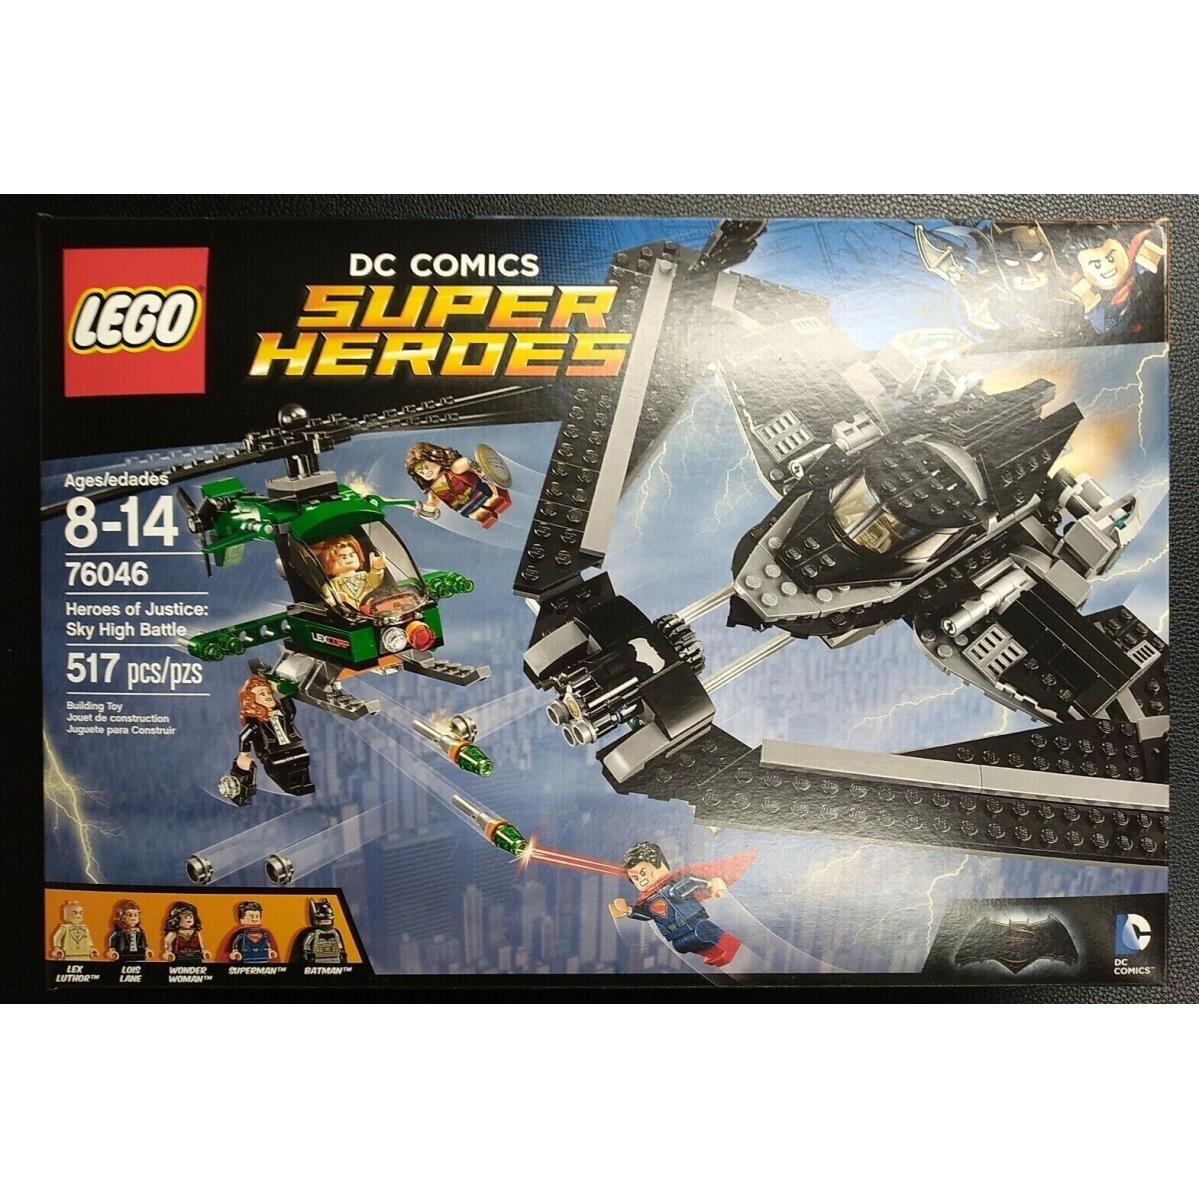 Lego Super Heroes Heroes of Justice: Sky High Battle 76046 Building Kit 517 Pcs